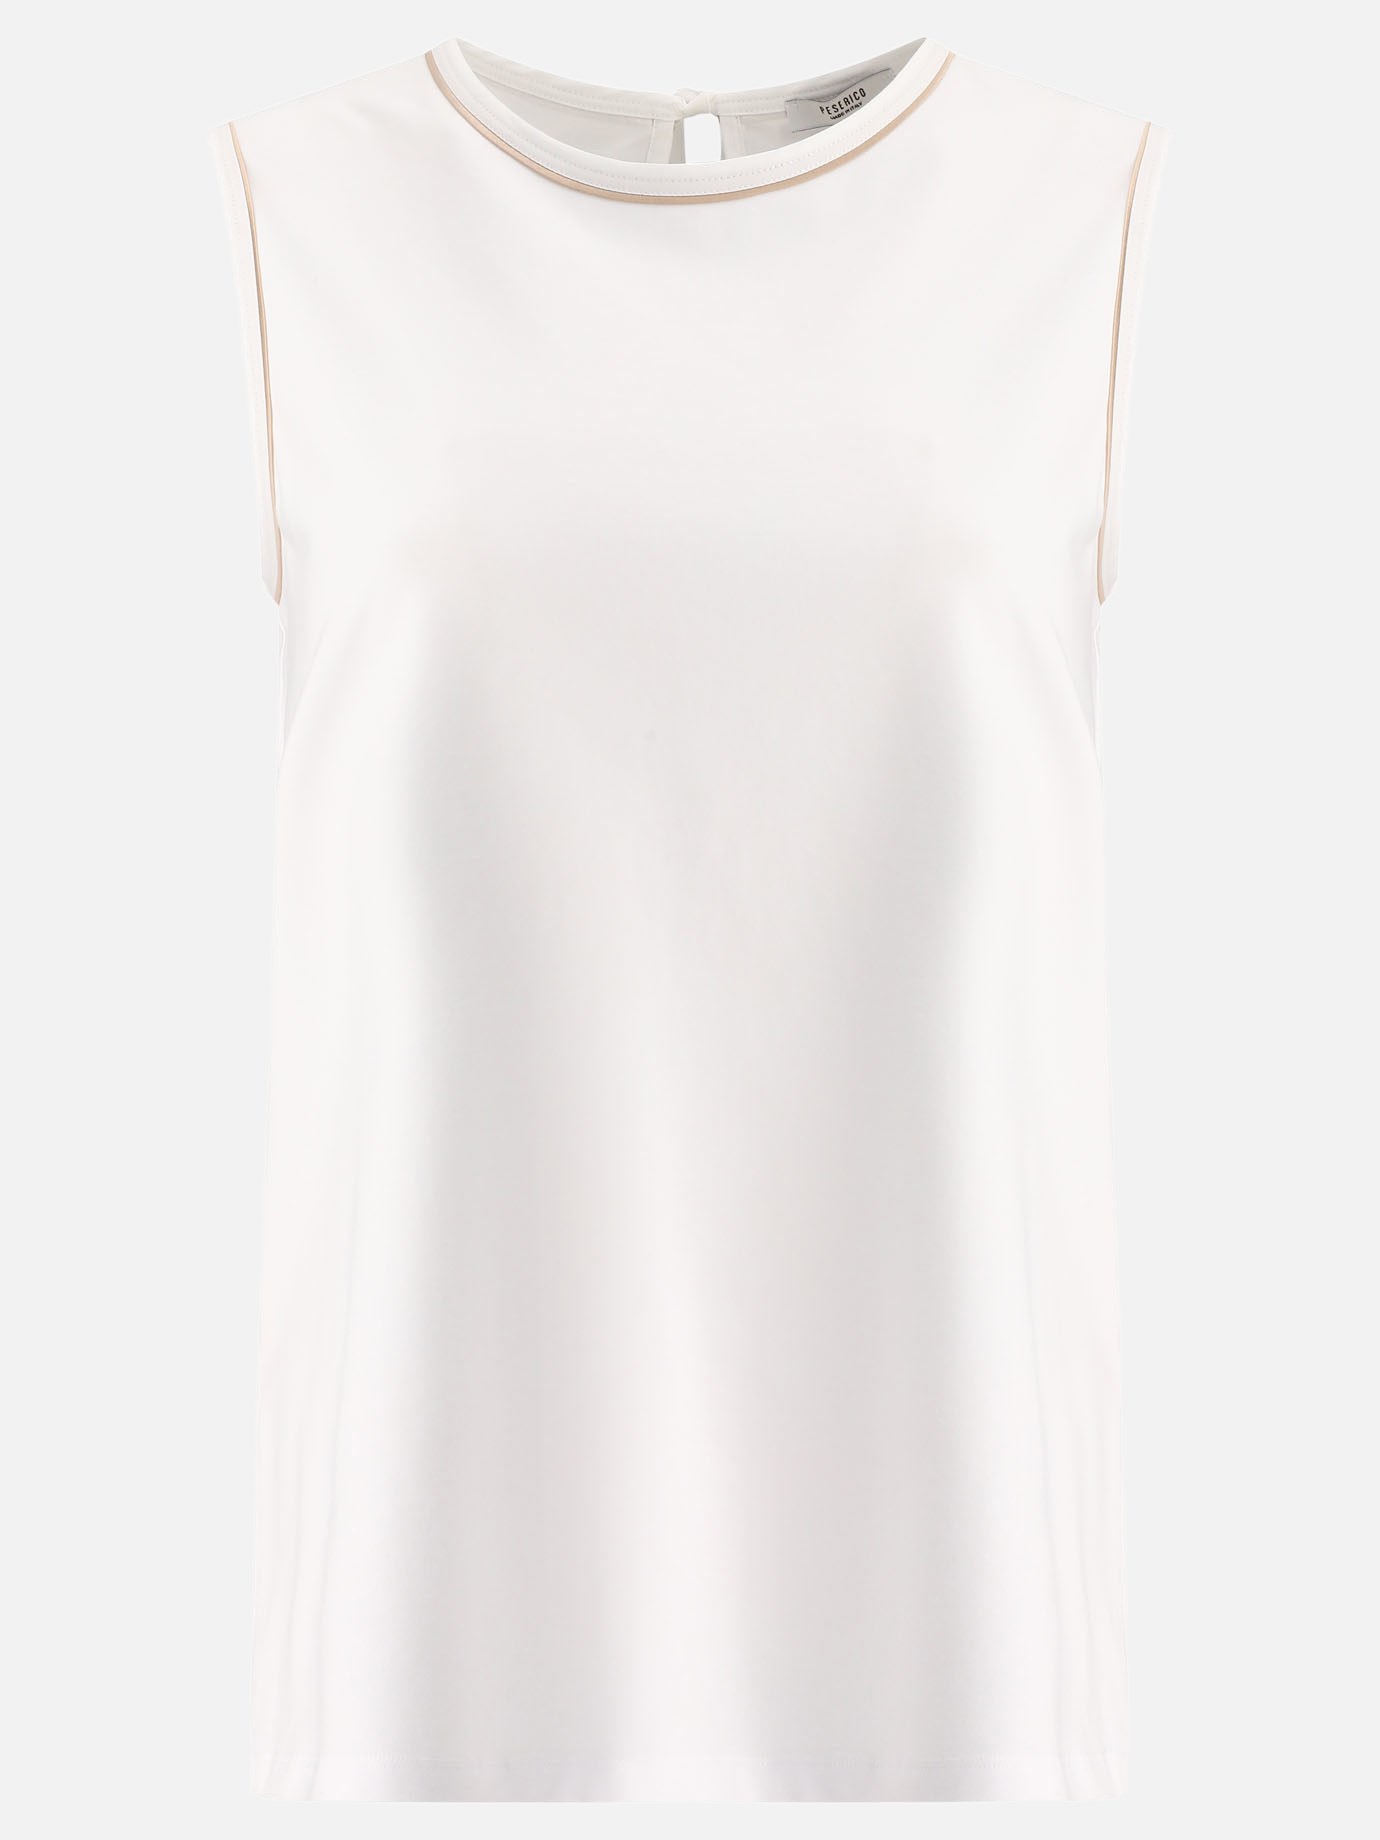 Sleeveless top with cut-out by Peserico